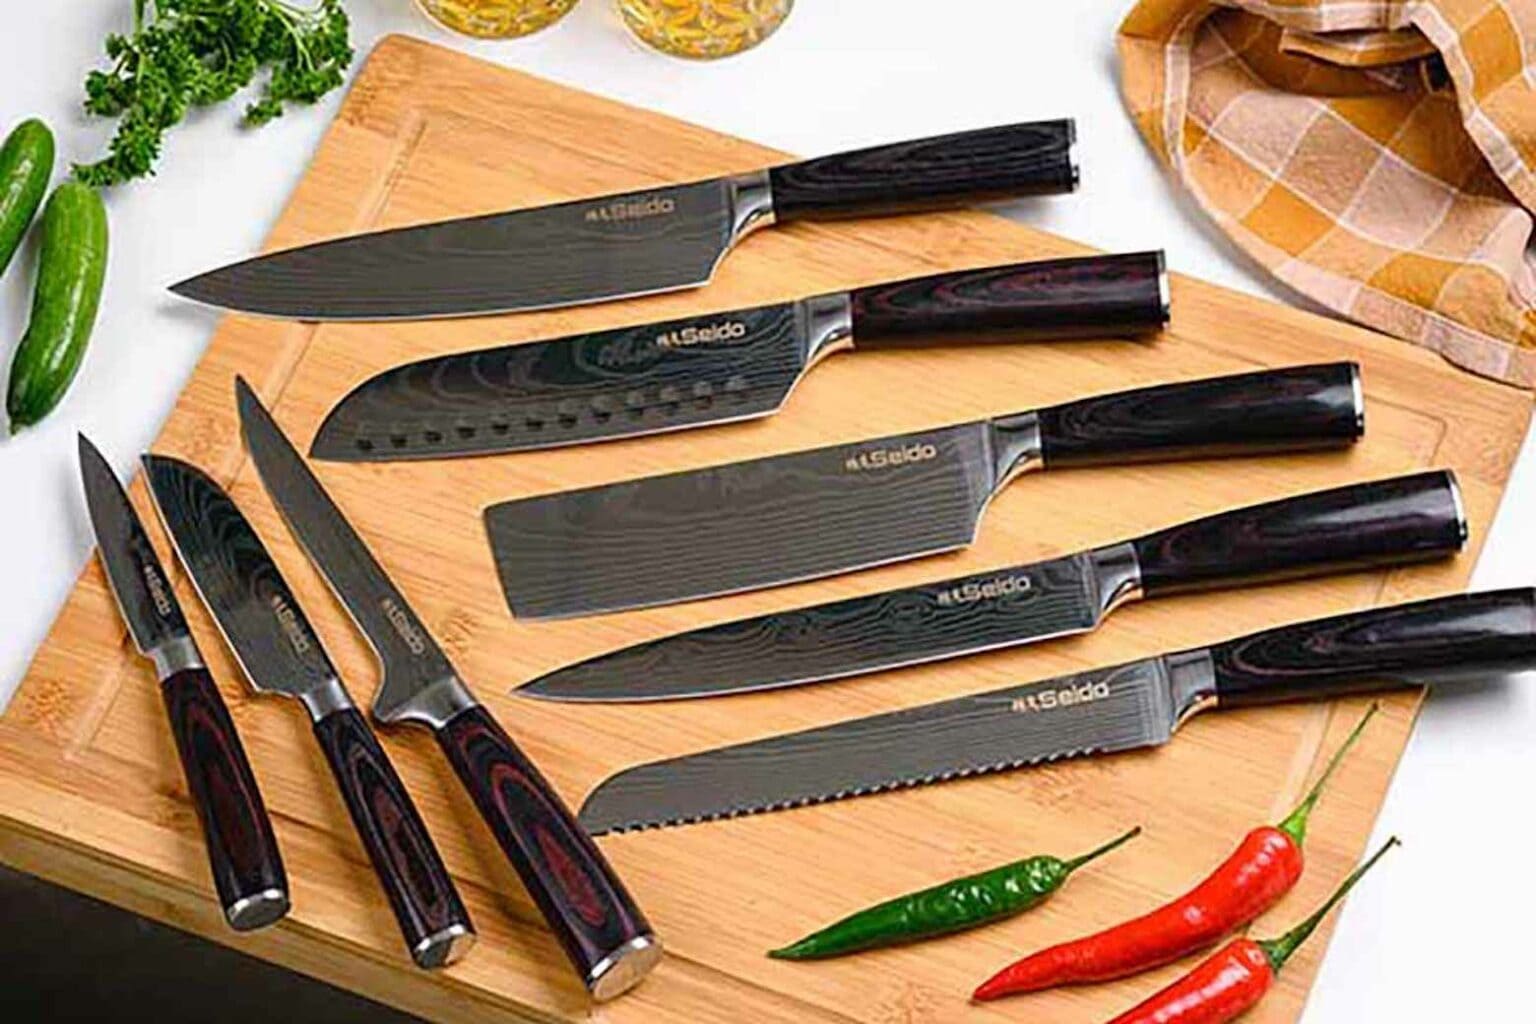 This eight-piece Japanese Master Chef knife set is perfect for the chef-mom in your life.